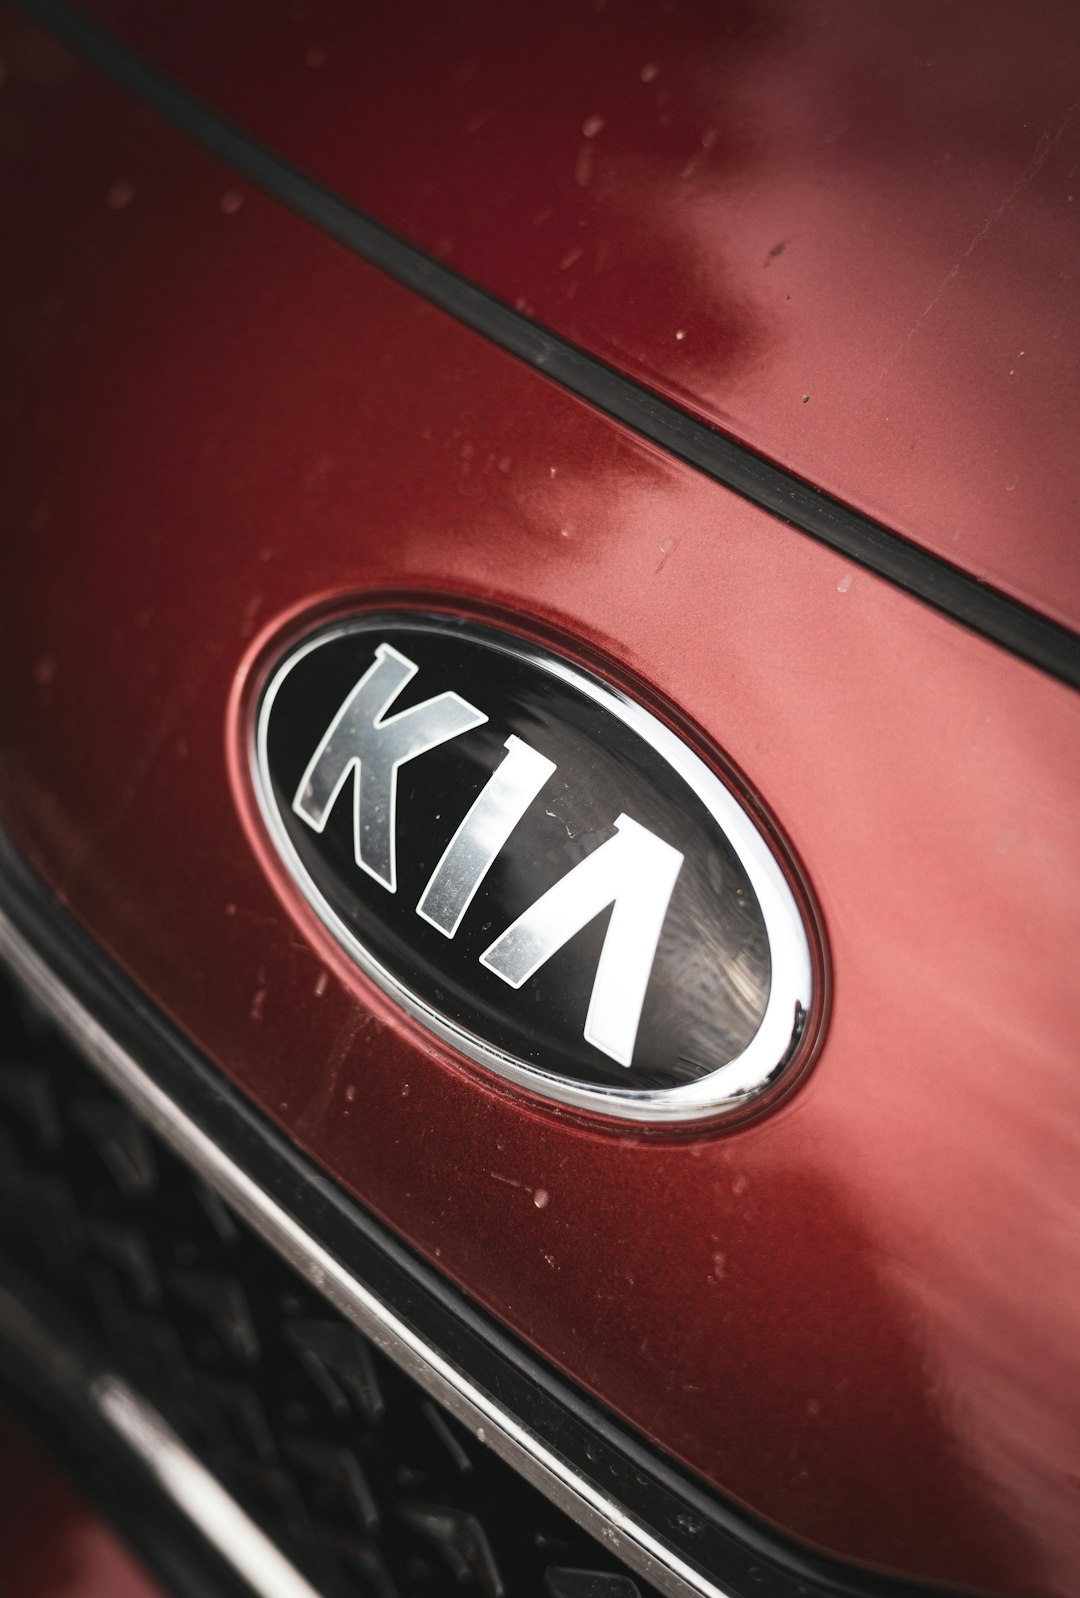 The Kia Seltos is a stylish and versatile crossover SUV that offers impressive performance and advanced technology features.